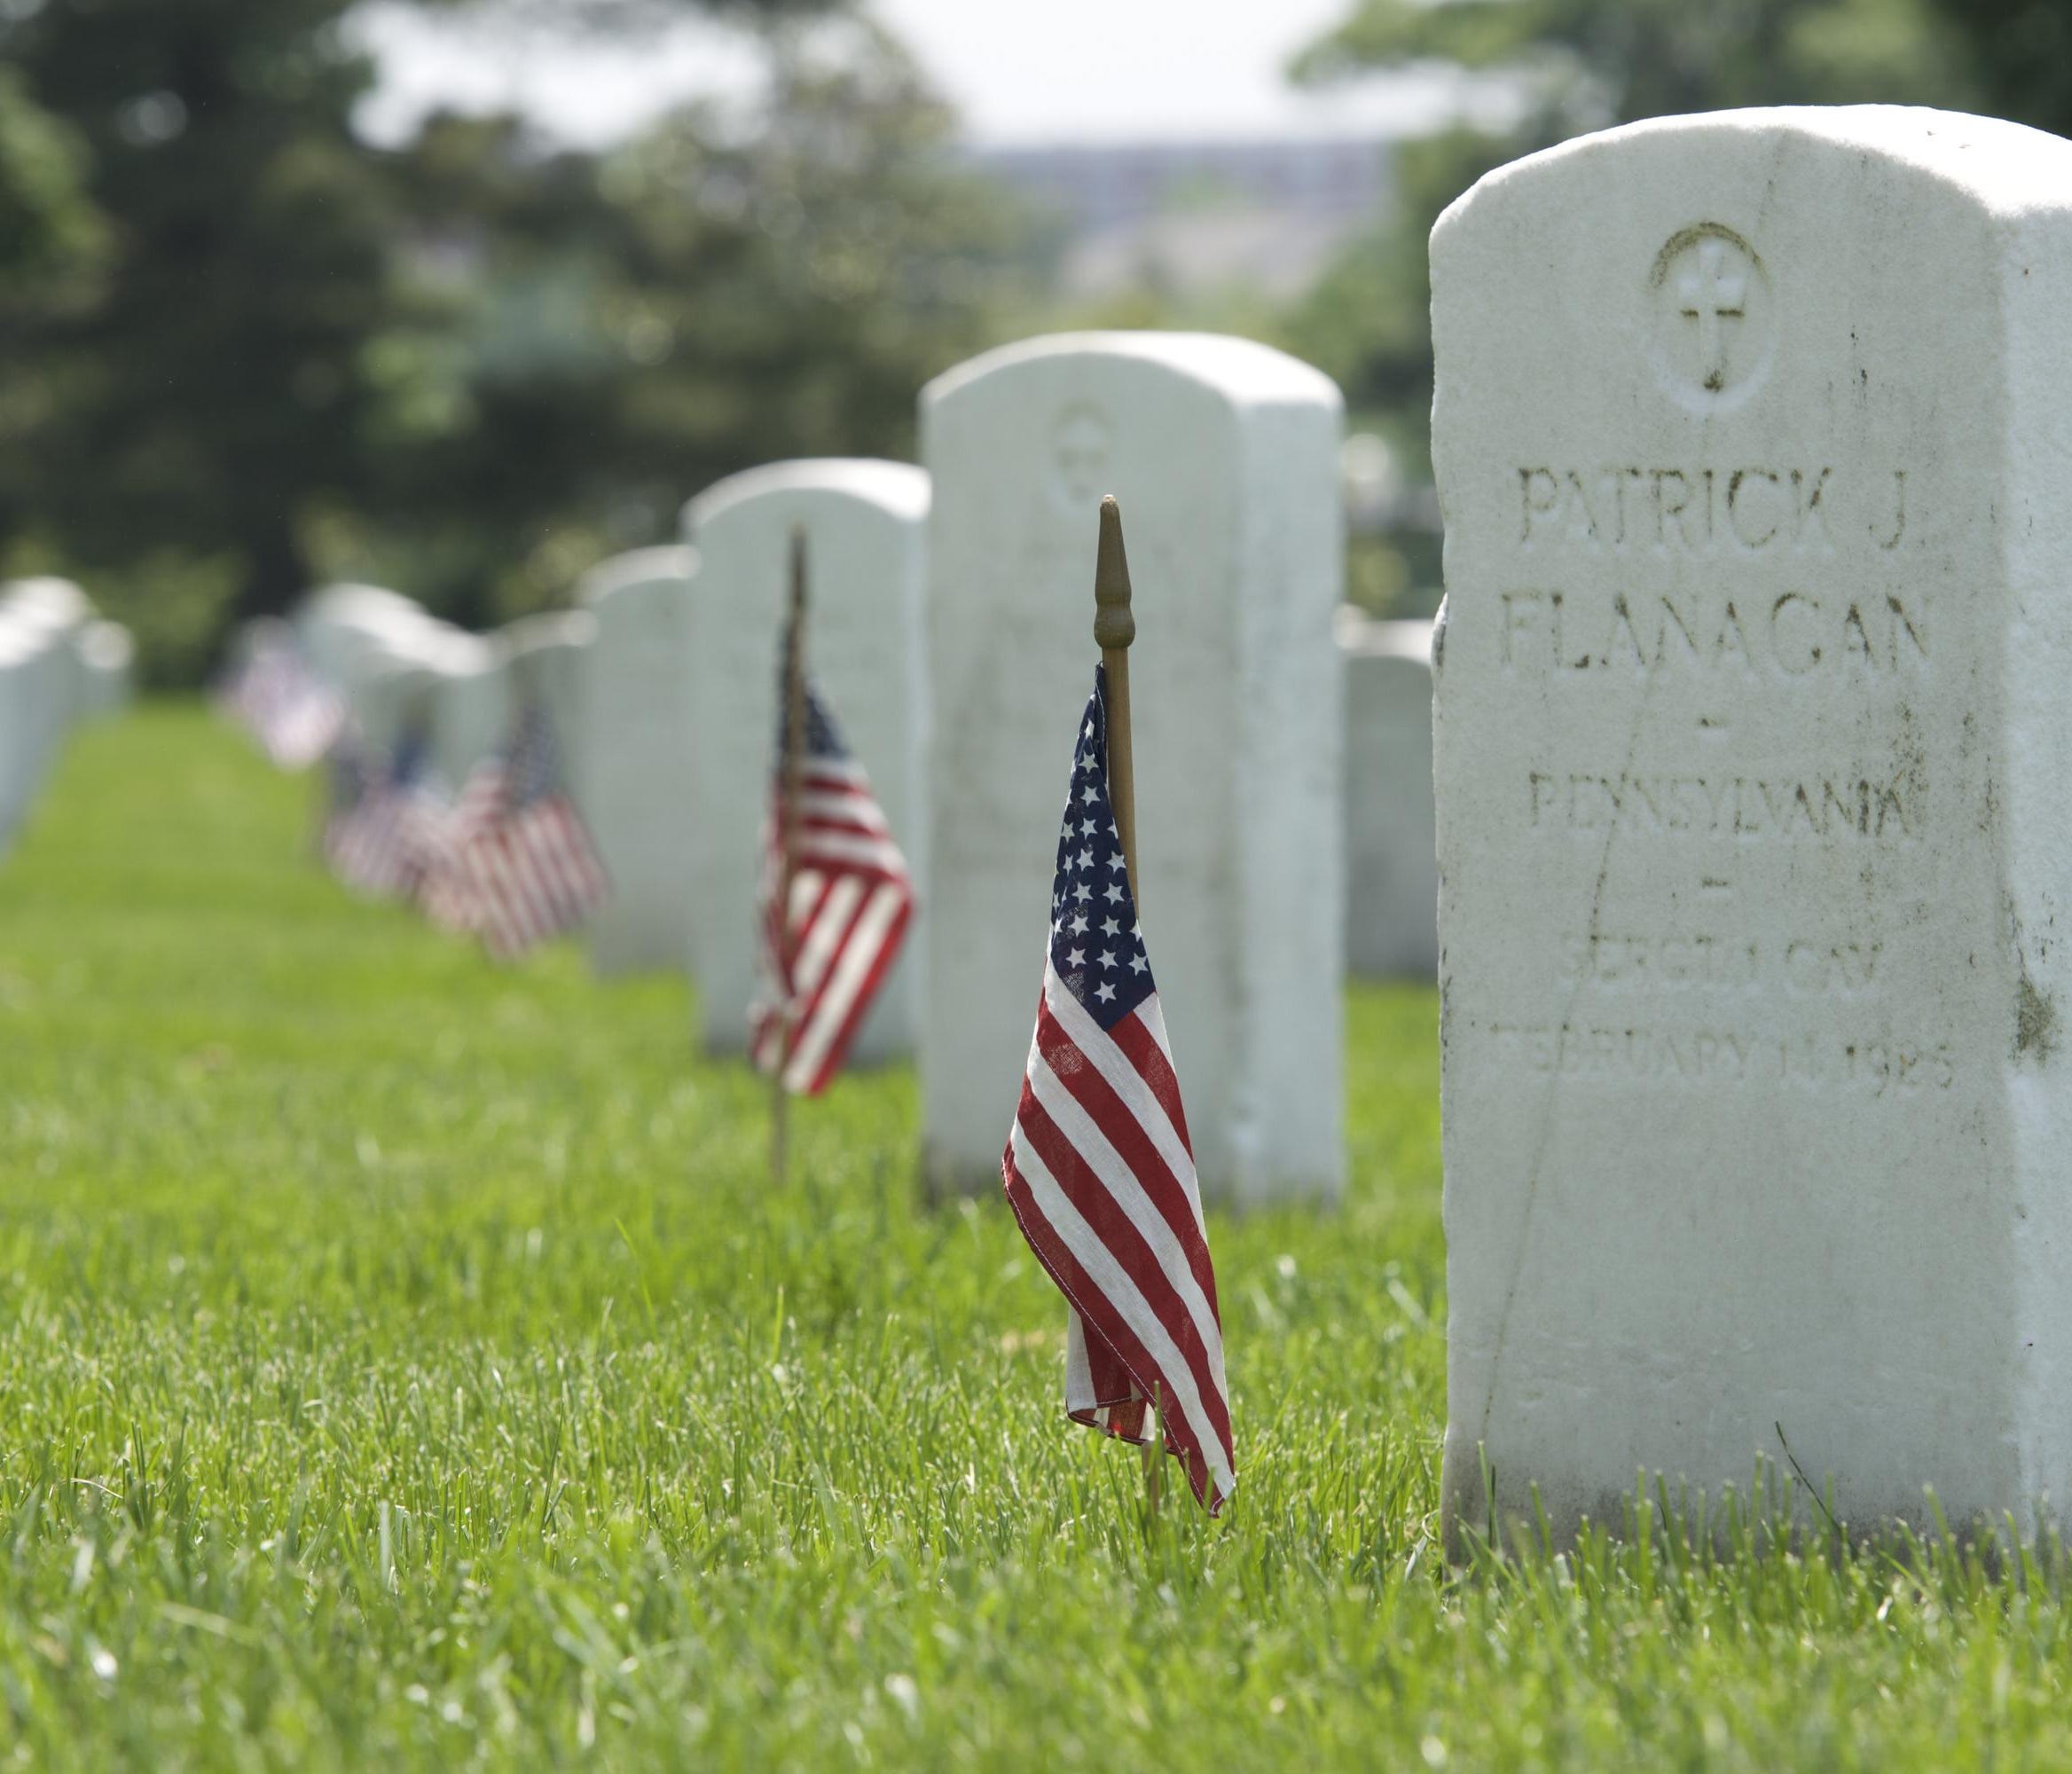 May 26, 2016 -- Arlington, VA -- Soldiers of The Old Guard place flags at every grave in Arlington National Cemetery for Memorial Day. ORG XMIT: JC 05/26/2016 [Via MerlinFTP Drop]